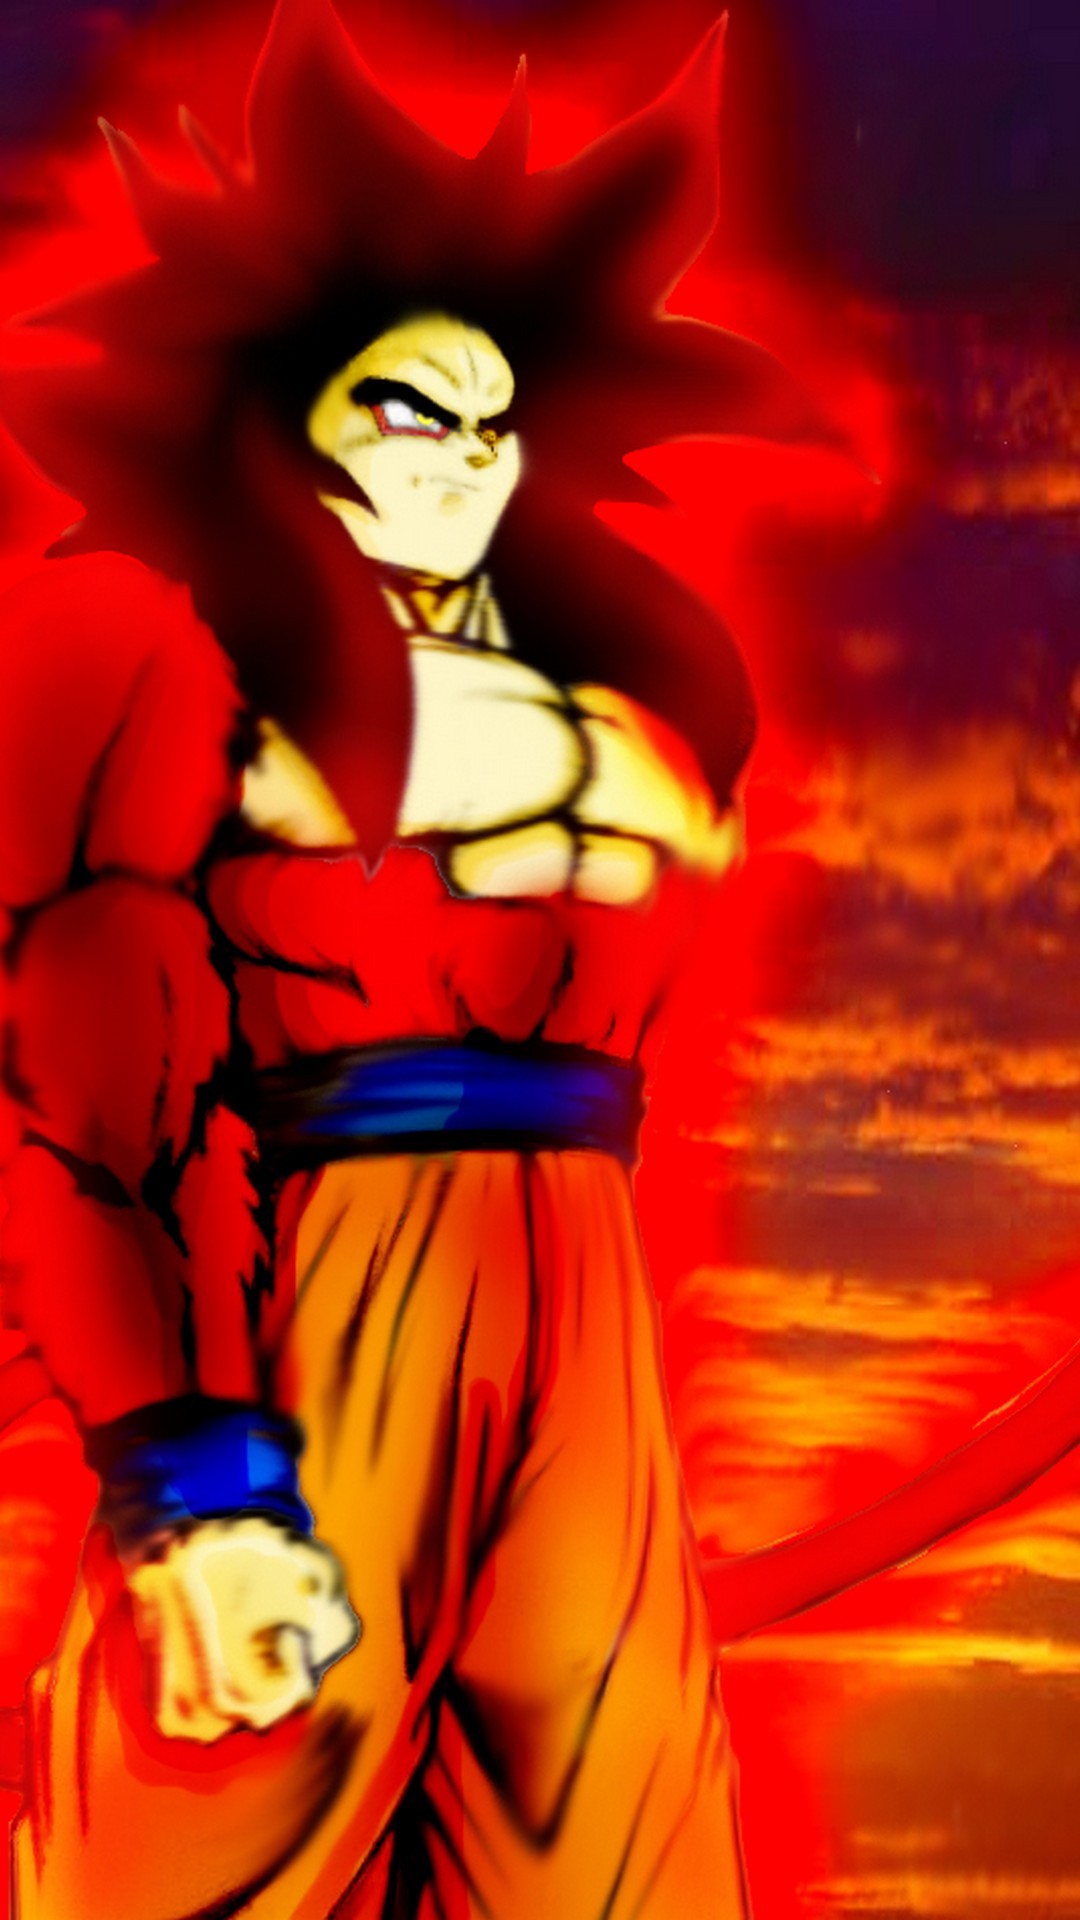 iPhone X Wallpaper Goku SSJ4 with image resolution 1080x1920 pixel. You can make this wallpaper for your iPhone 5, 6, 7, 8, X backgrounds, Mobile Screensaver, or iPad Lock Screen